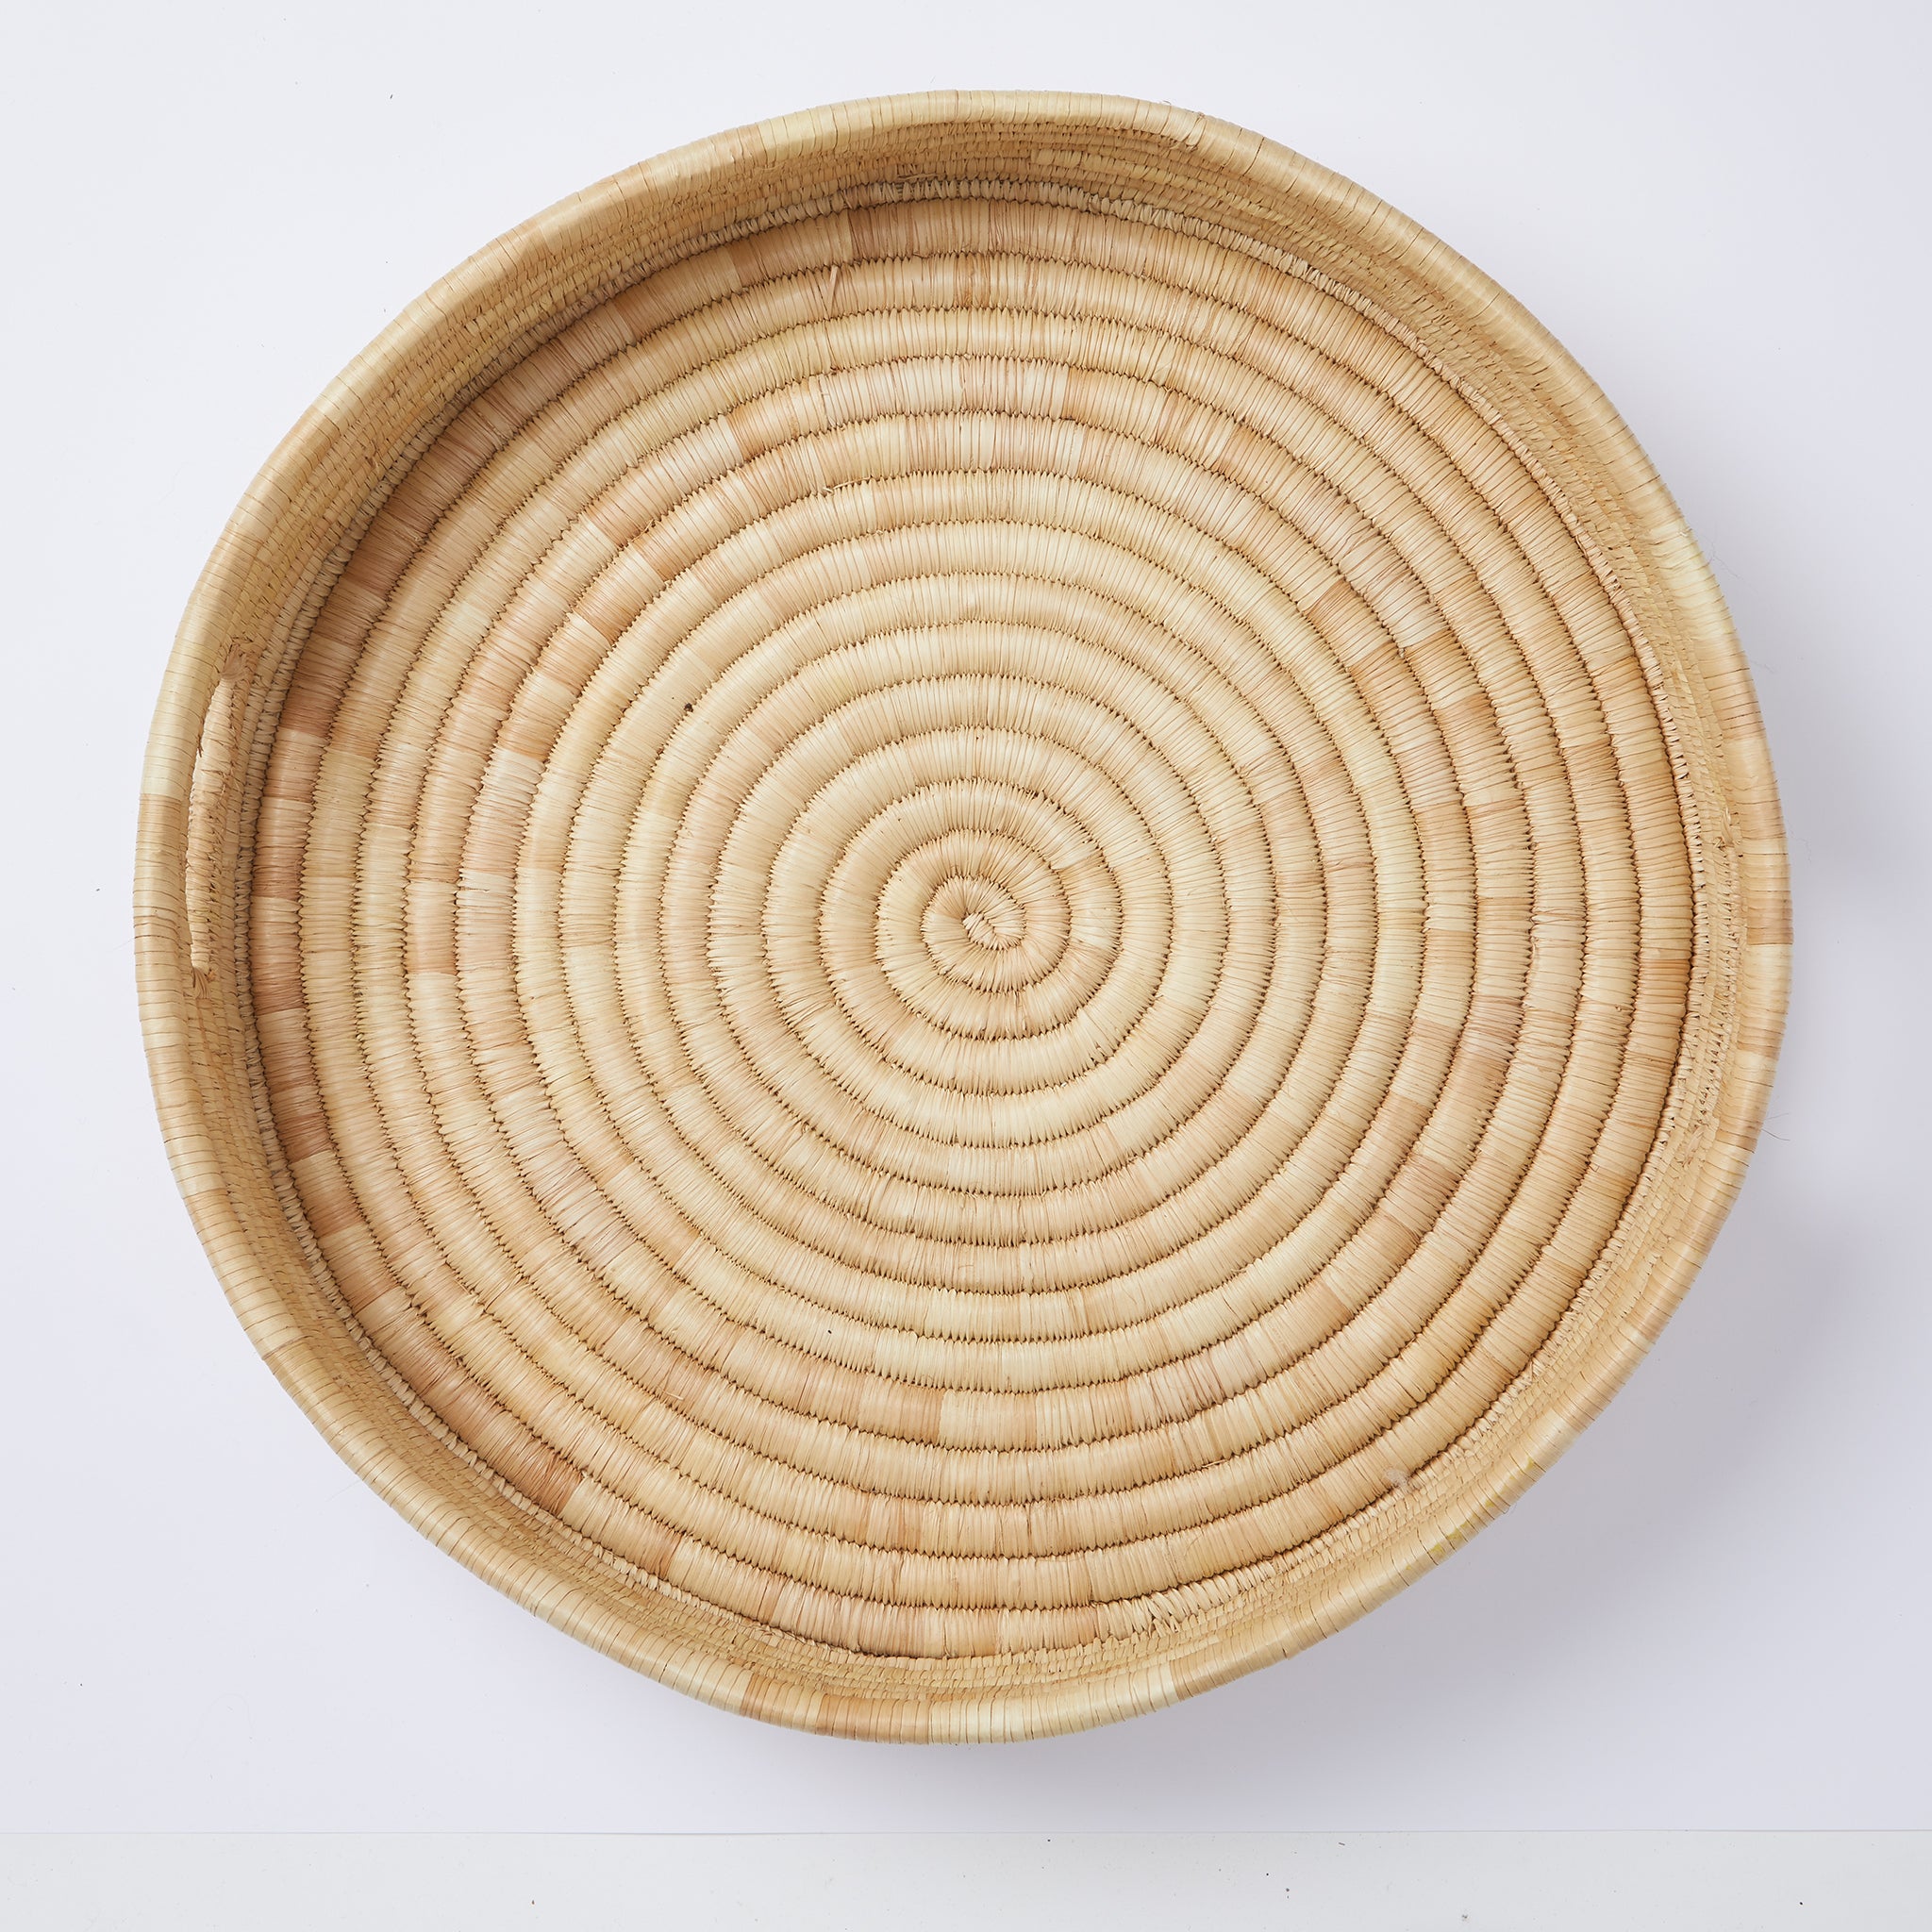 Tray "Umi" Supervision. Serve in style: The minimalist and very stable "Umi" tray is carefully woven from palm leaves. A casual all-rounder for your home.   Diameter: 50 cm Height: 10 cm